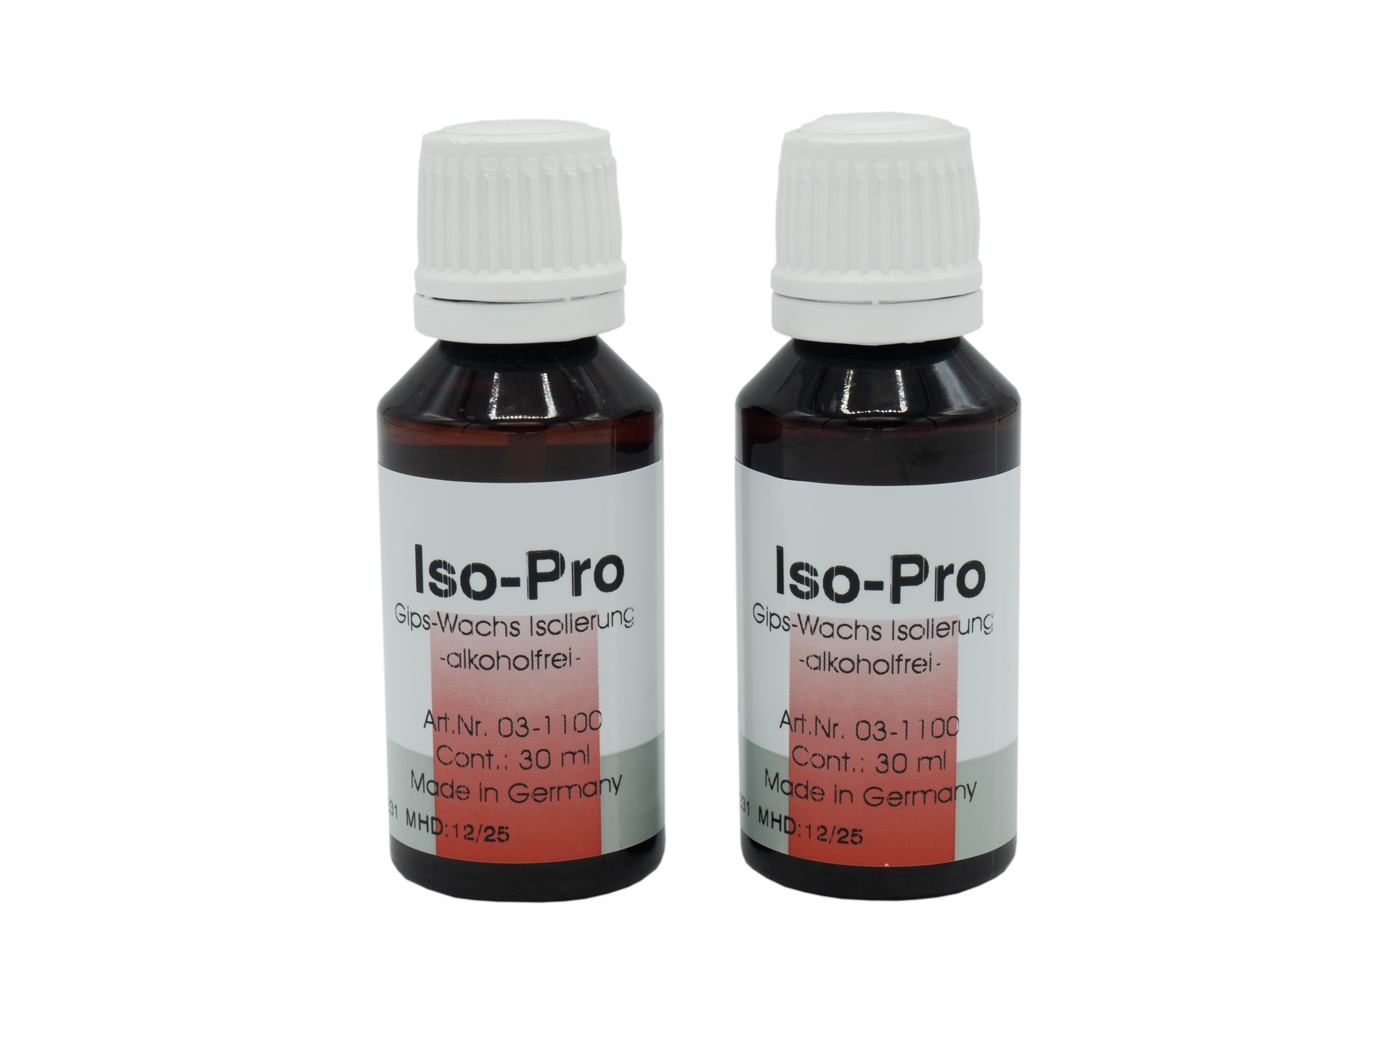 Iso-Pro Wax-Plaster Bottle with integrated brush, 2 x 30 ml